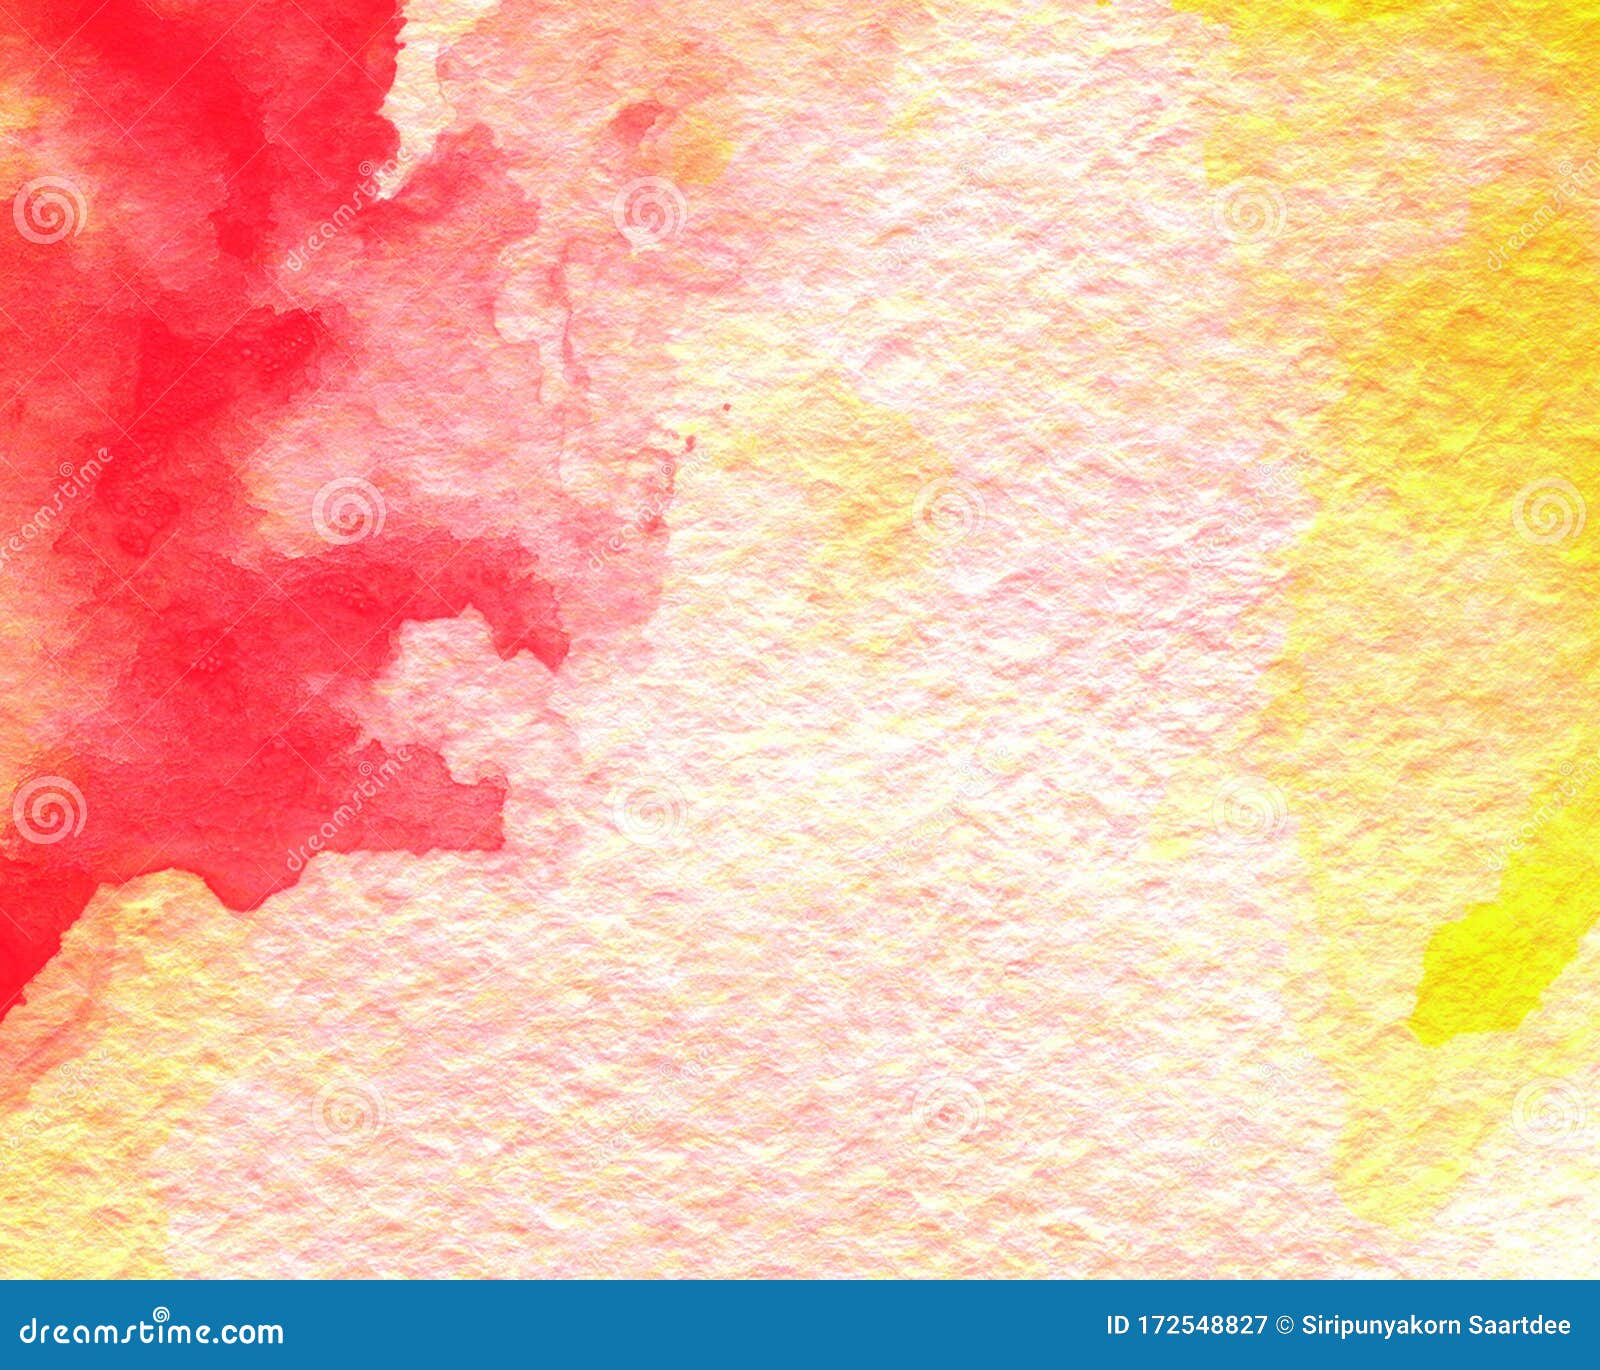 Red and Yellow Abstract Watercolor Texture Background. Watercolor Wallpaper.  Red Watercolor on White Background Stock Illustration - Illustration of  textured, texture: 172548827